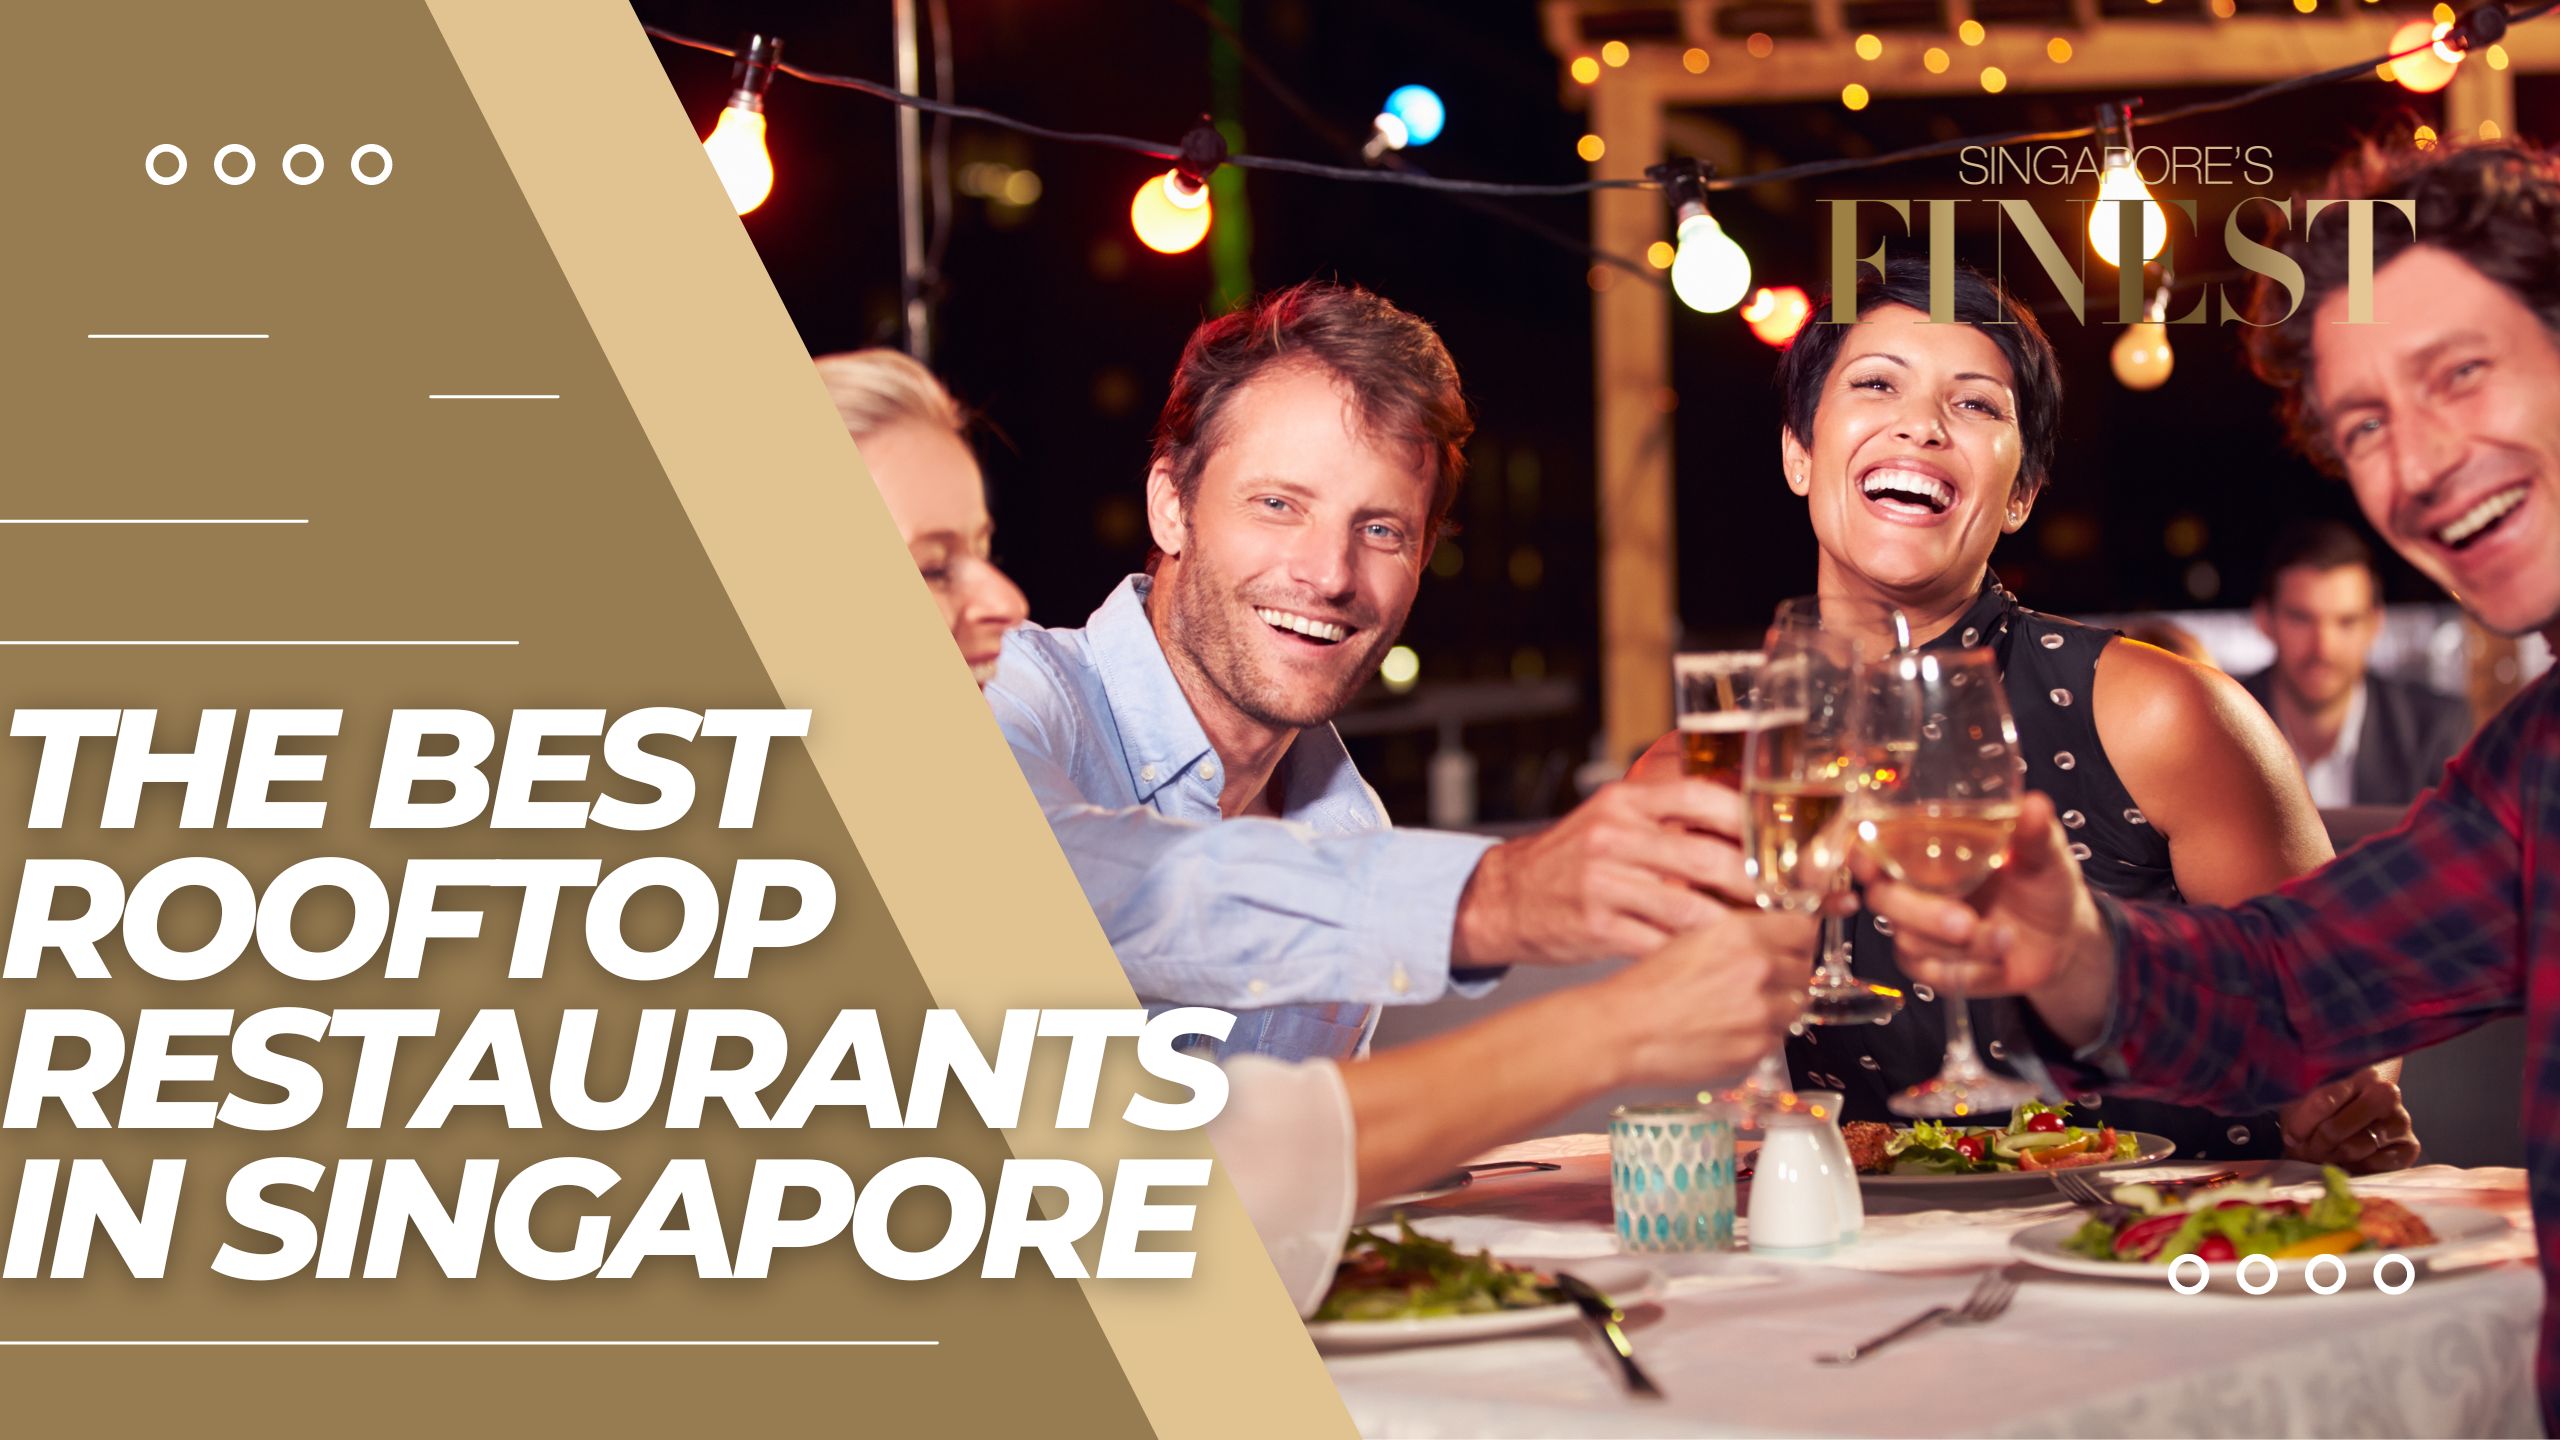 The Finest Rooftop Restaurants in Singapore